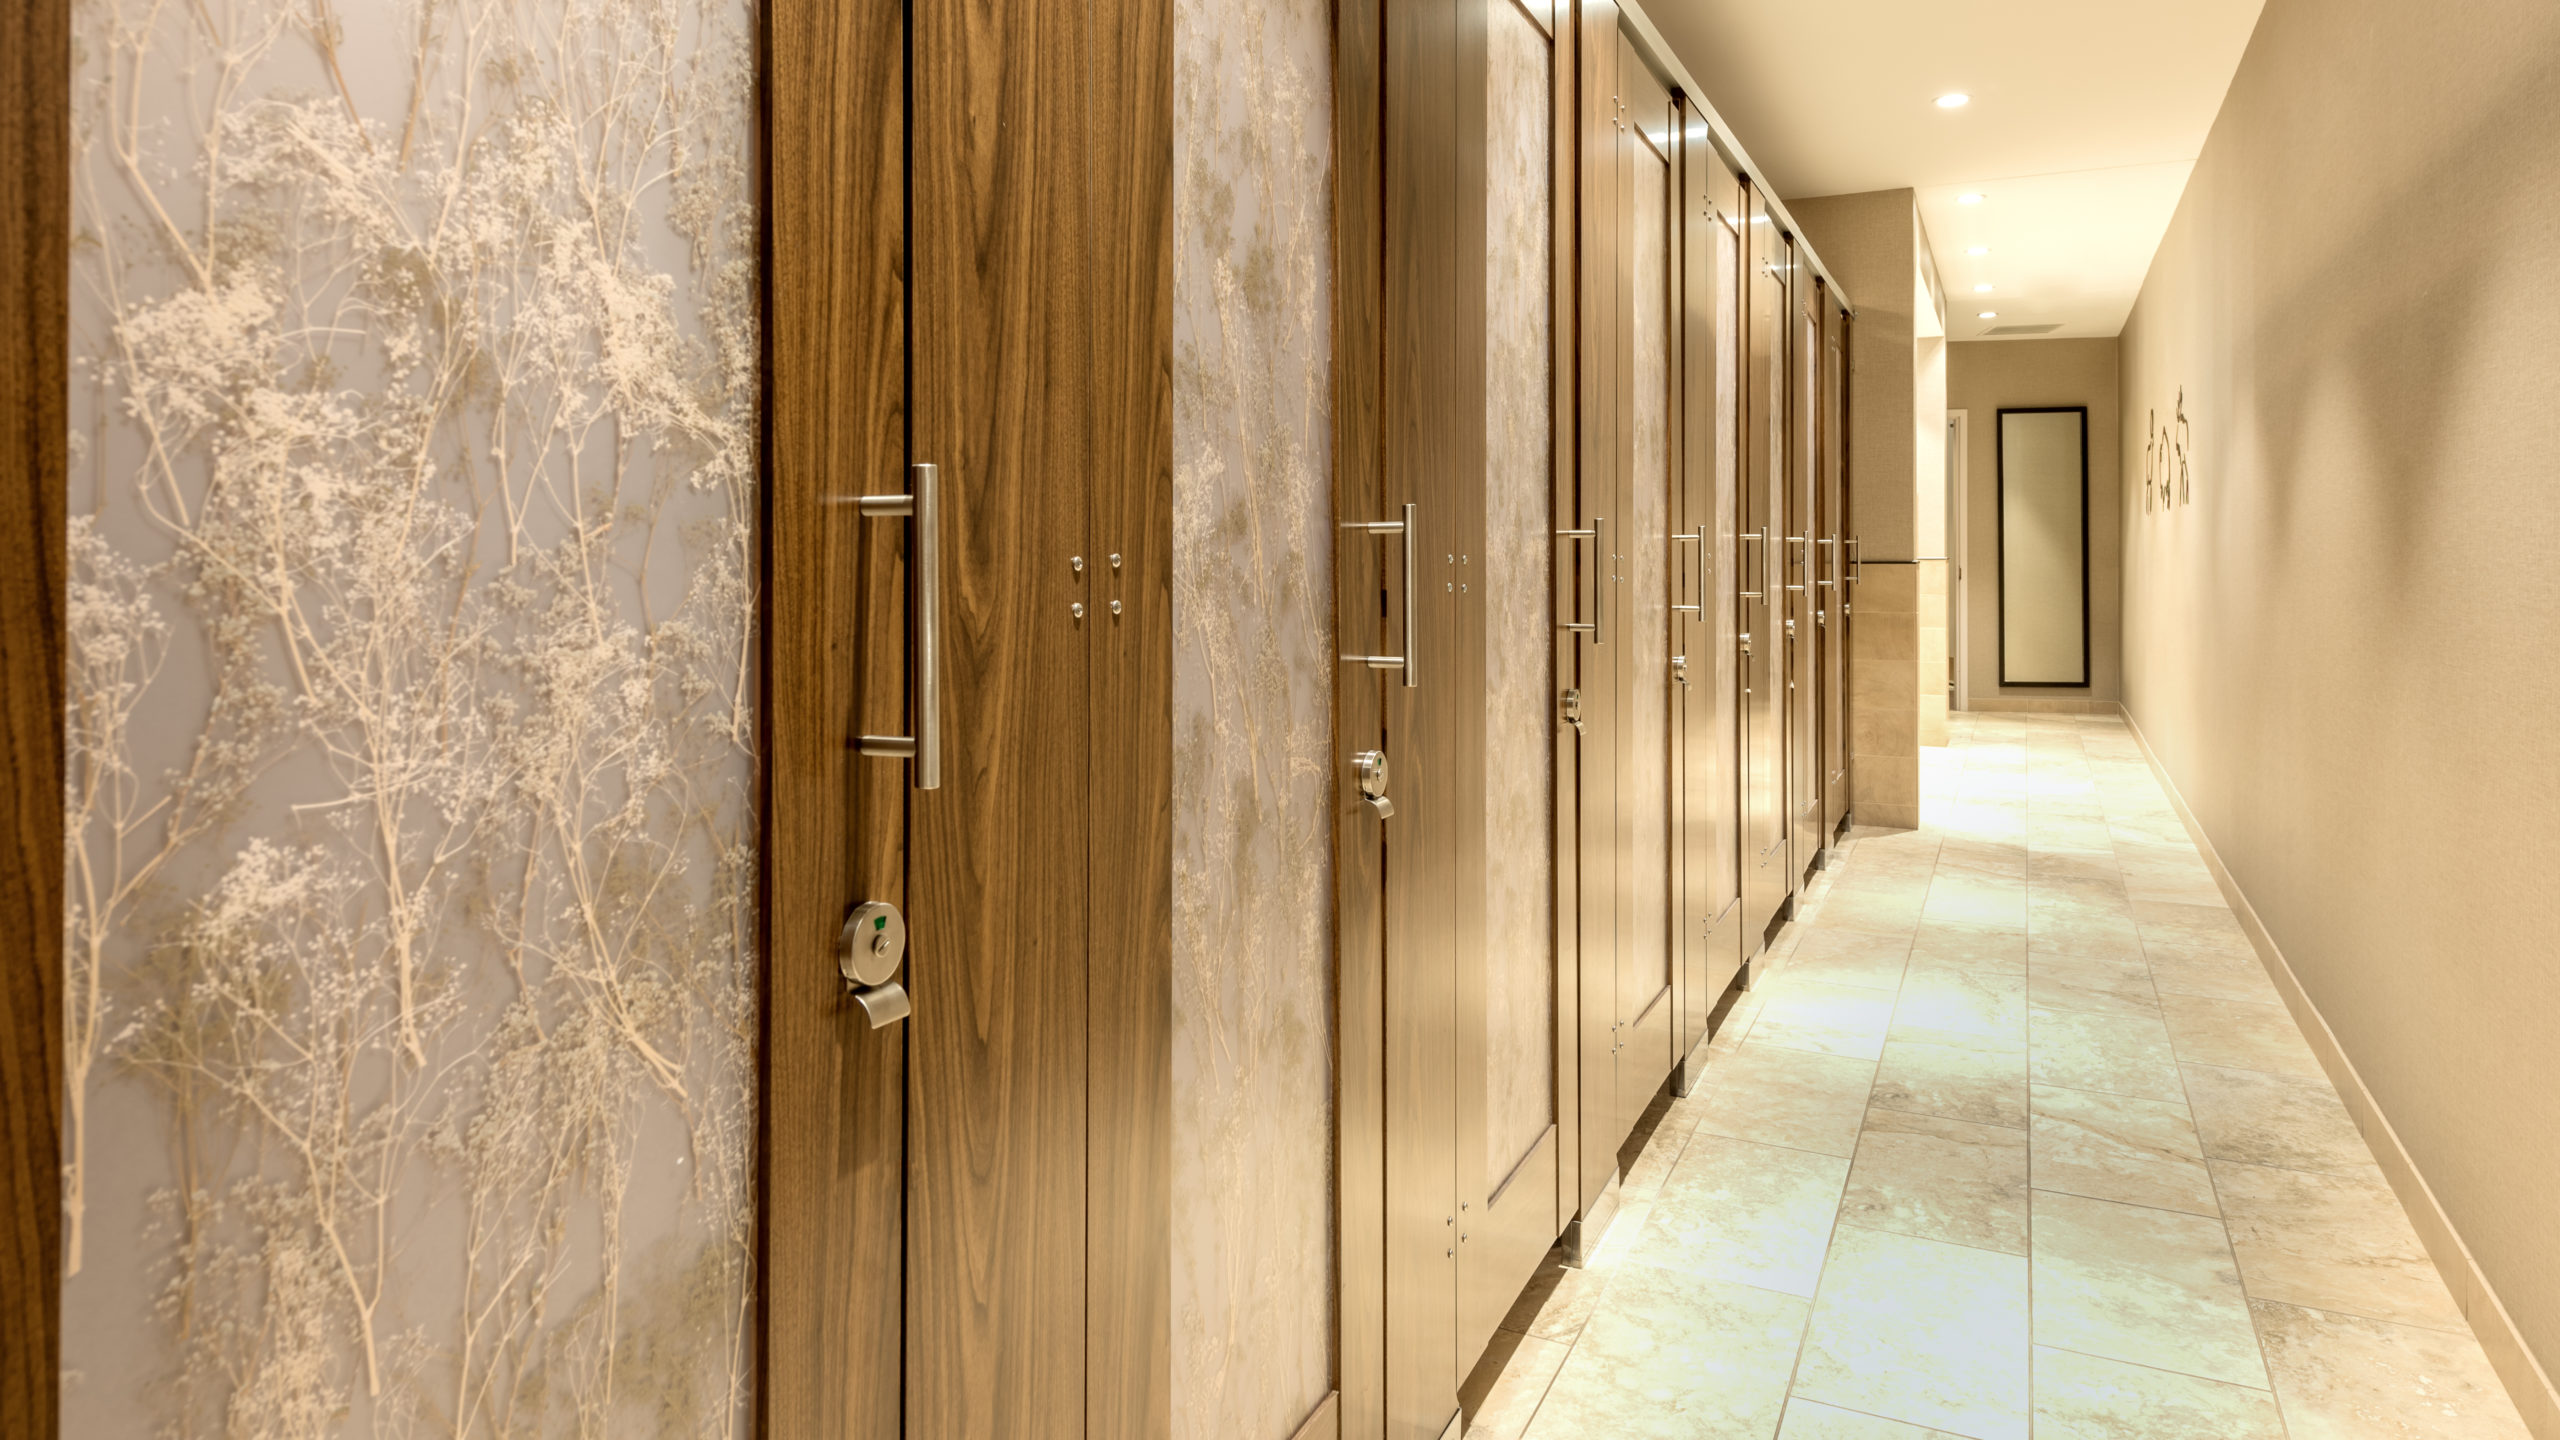 Expansive wildlife museum bathroom features eight, high privacy laminate doors with baby’s breath design on translucent acrylic door lite inserts.